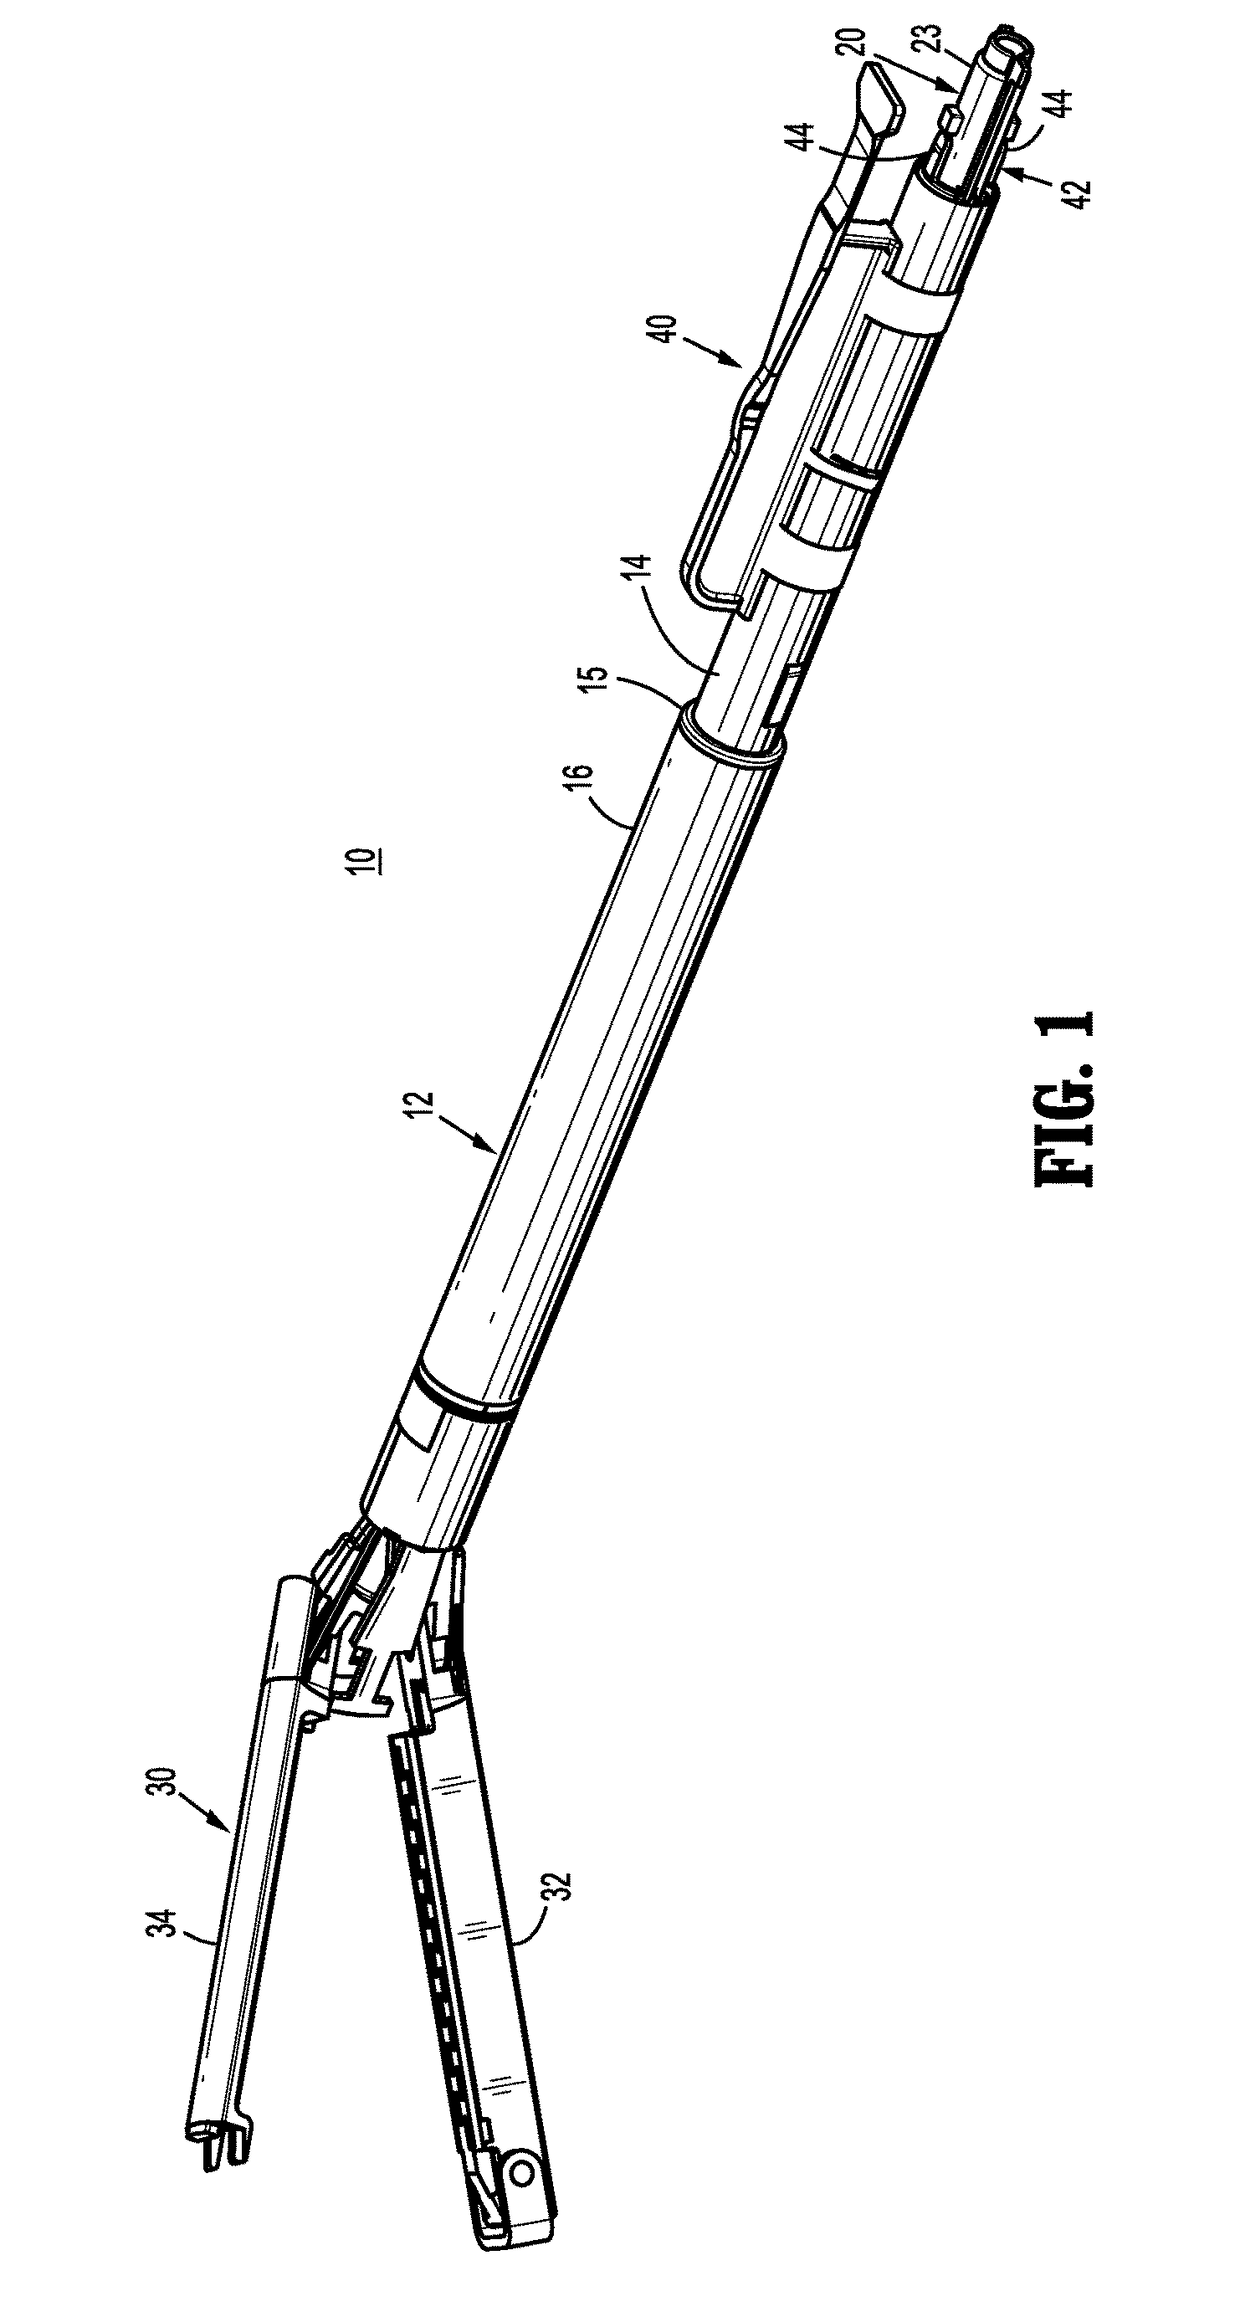 Surgical stapling loading unit having articulating jaws